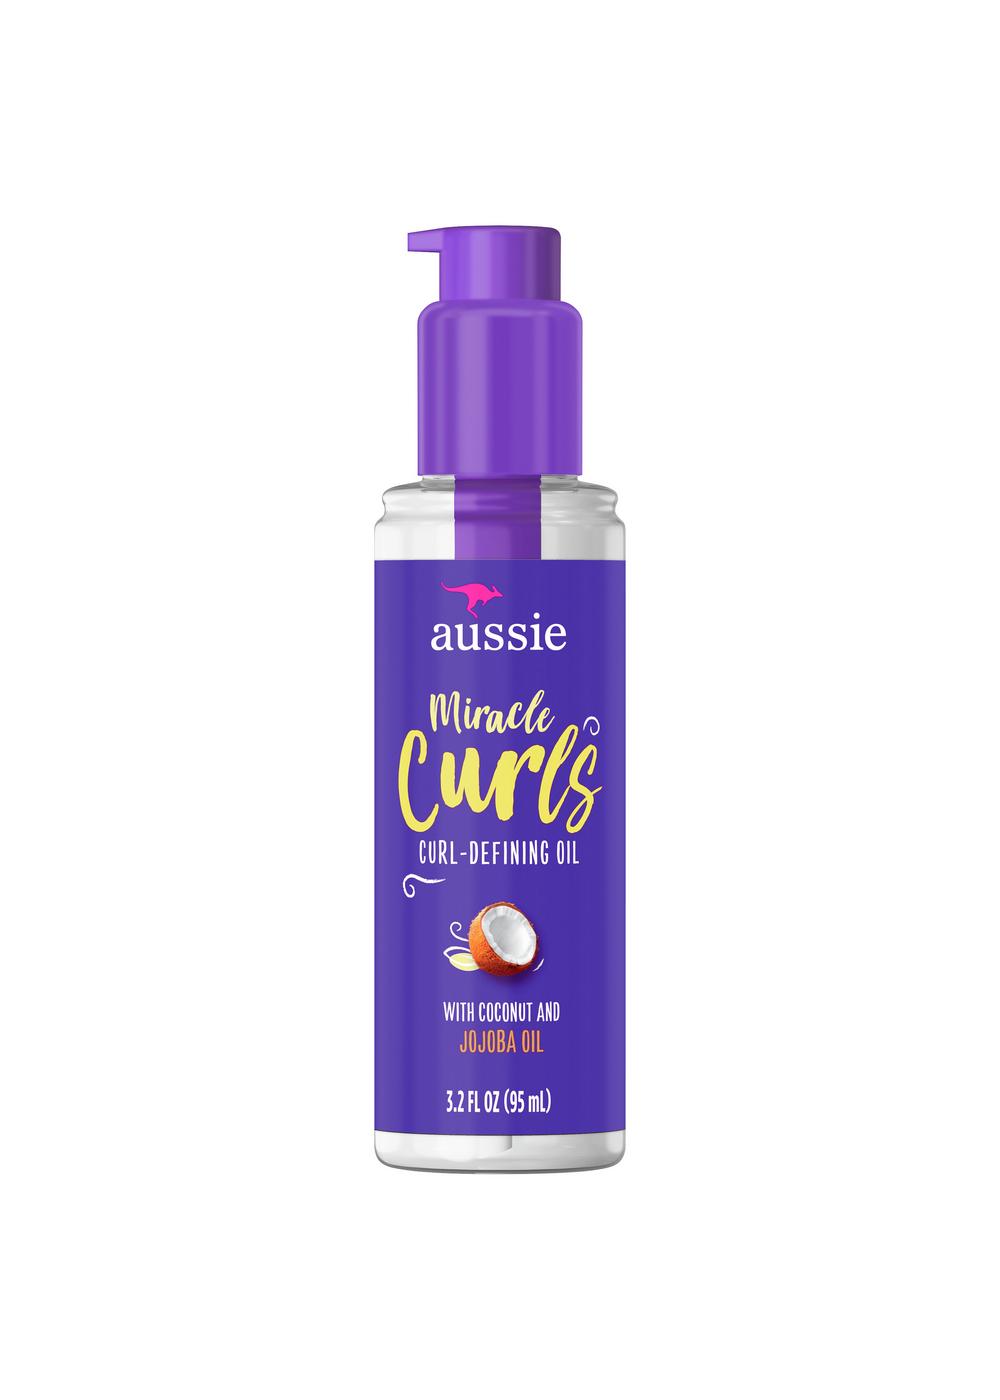 Aussie Miracle Curls Defining Oil; image 1 of 2